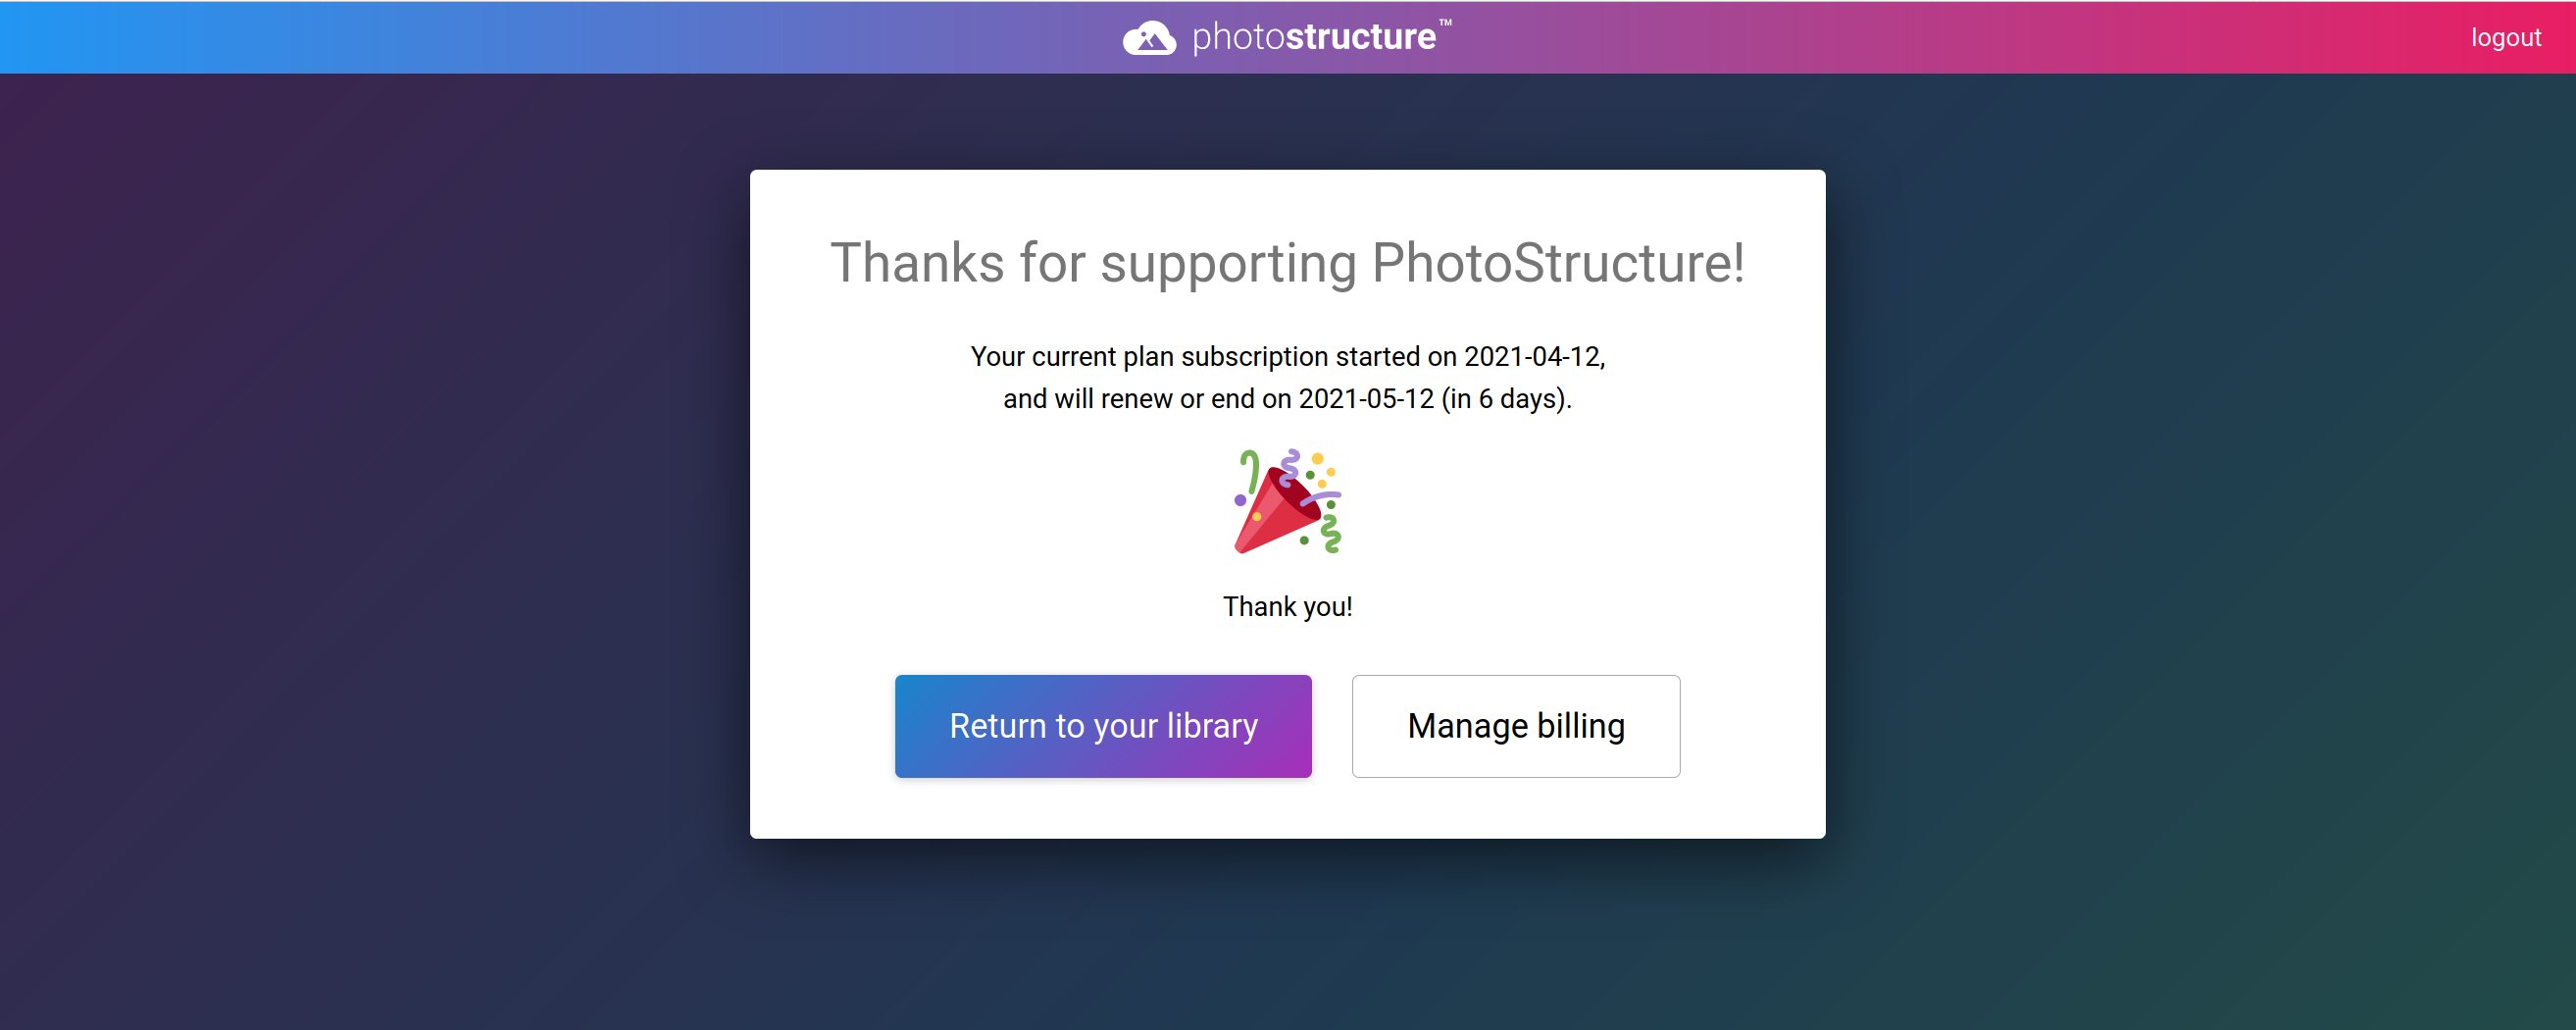 PhotoStructure&rsquo;s new billing portal